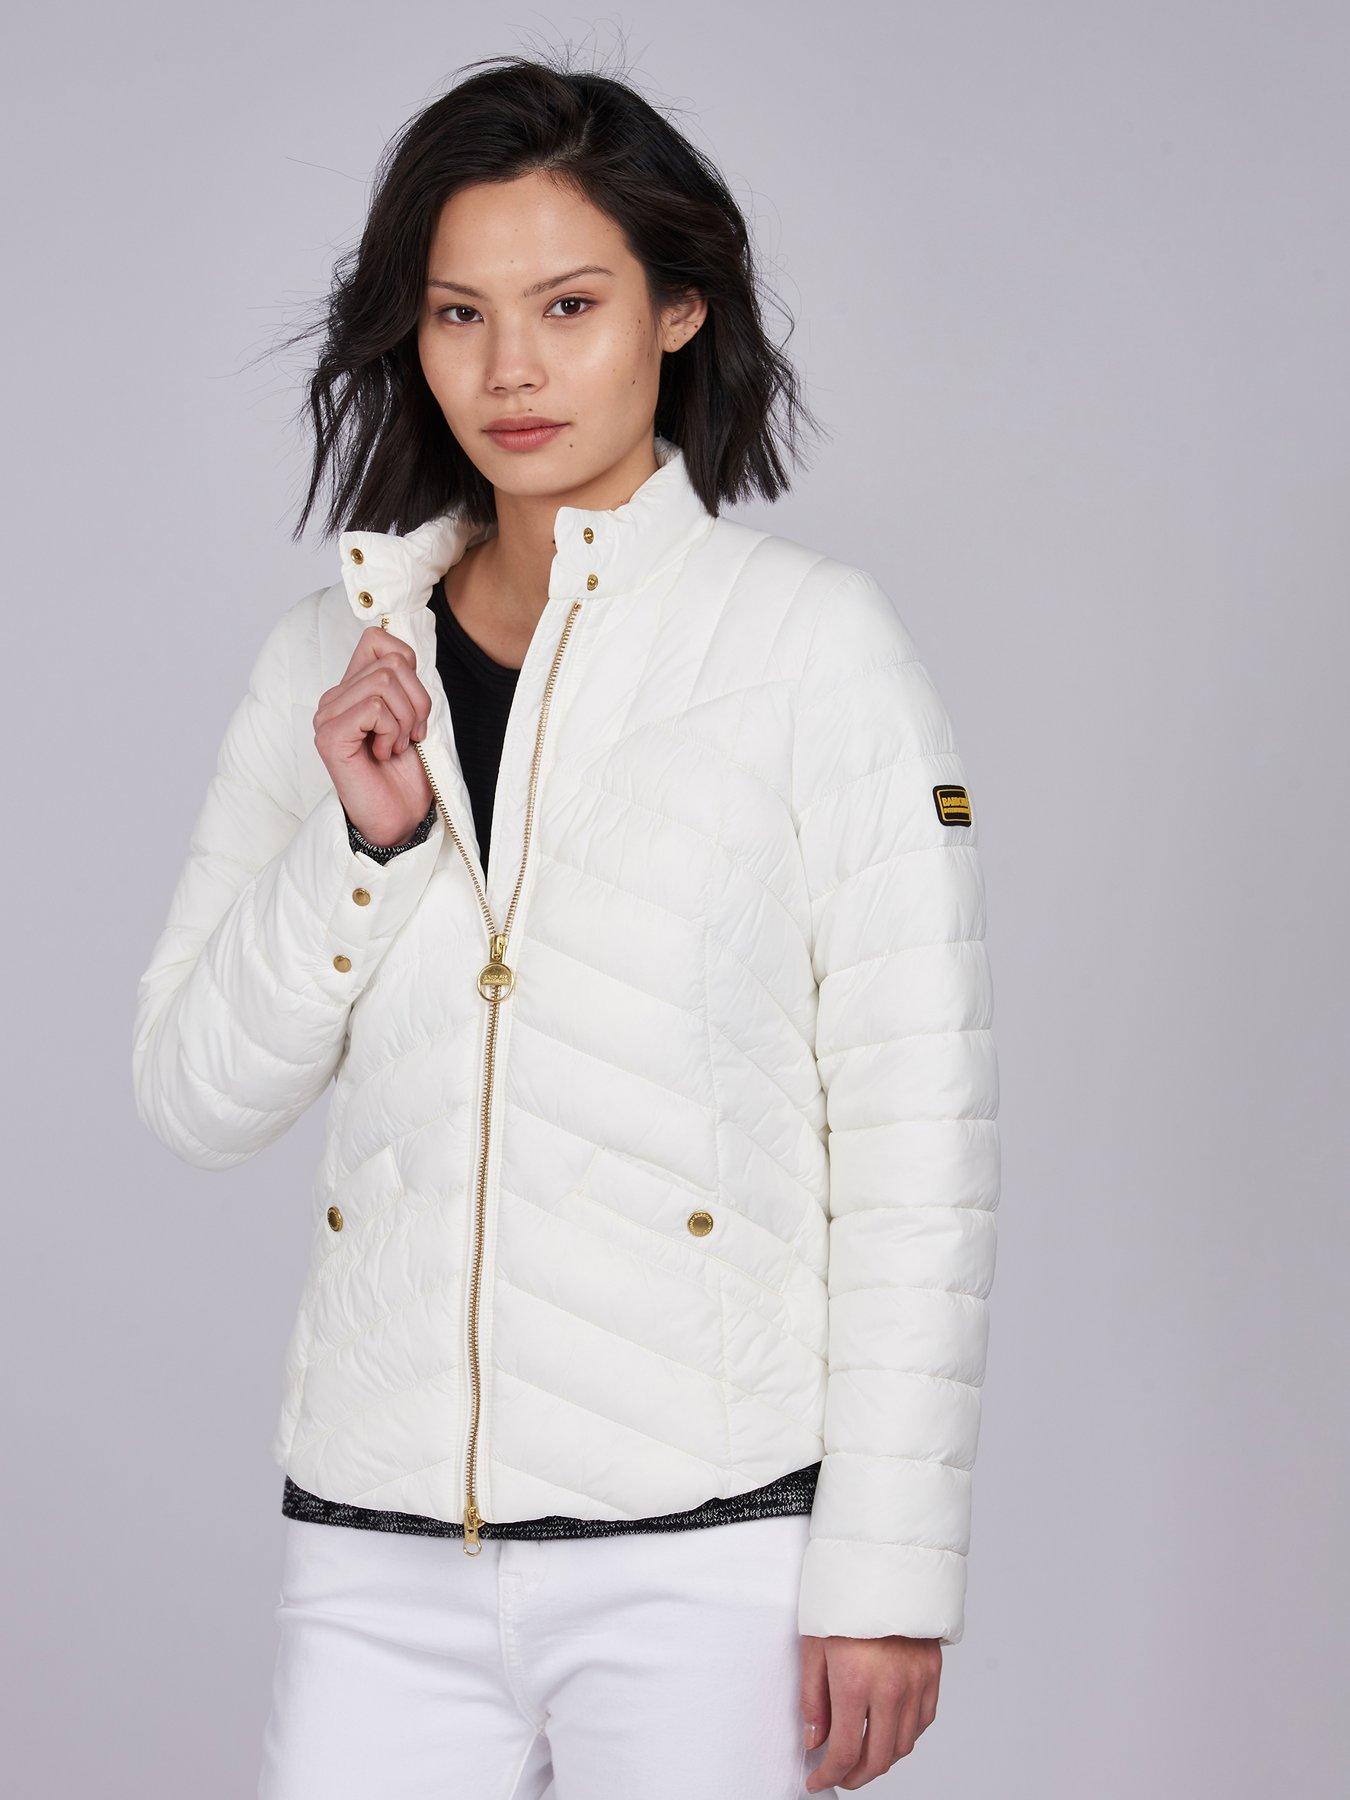 barbour jacket white